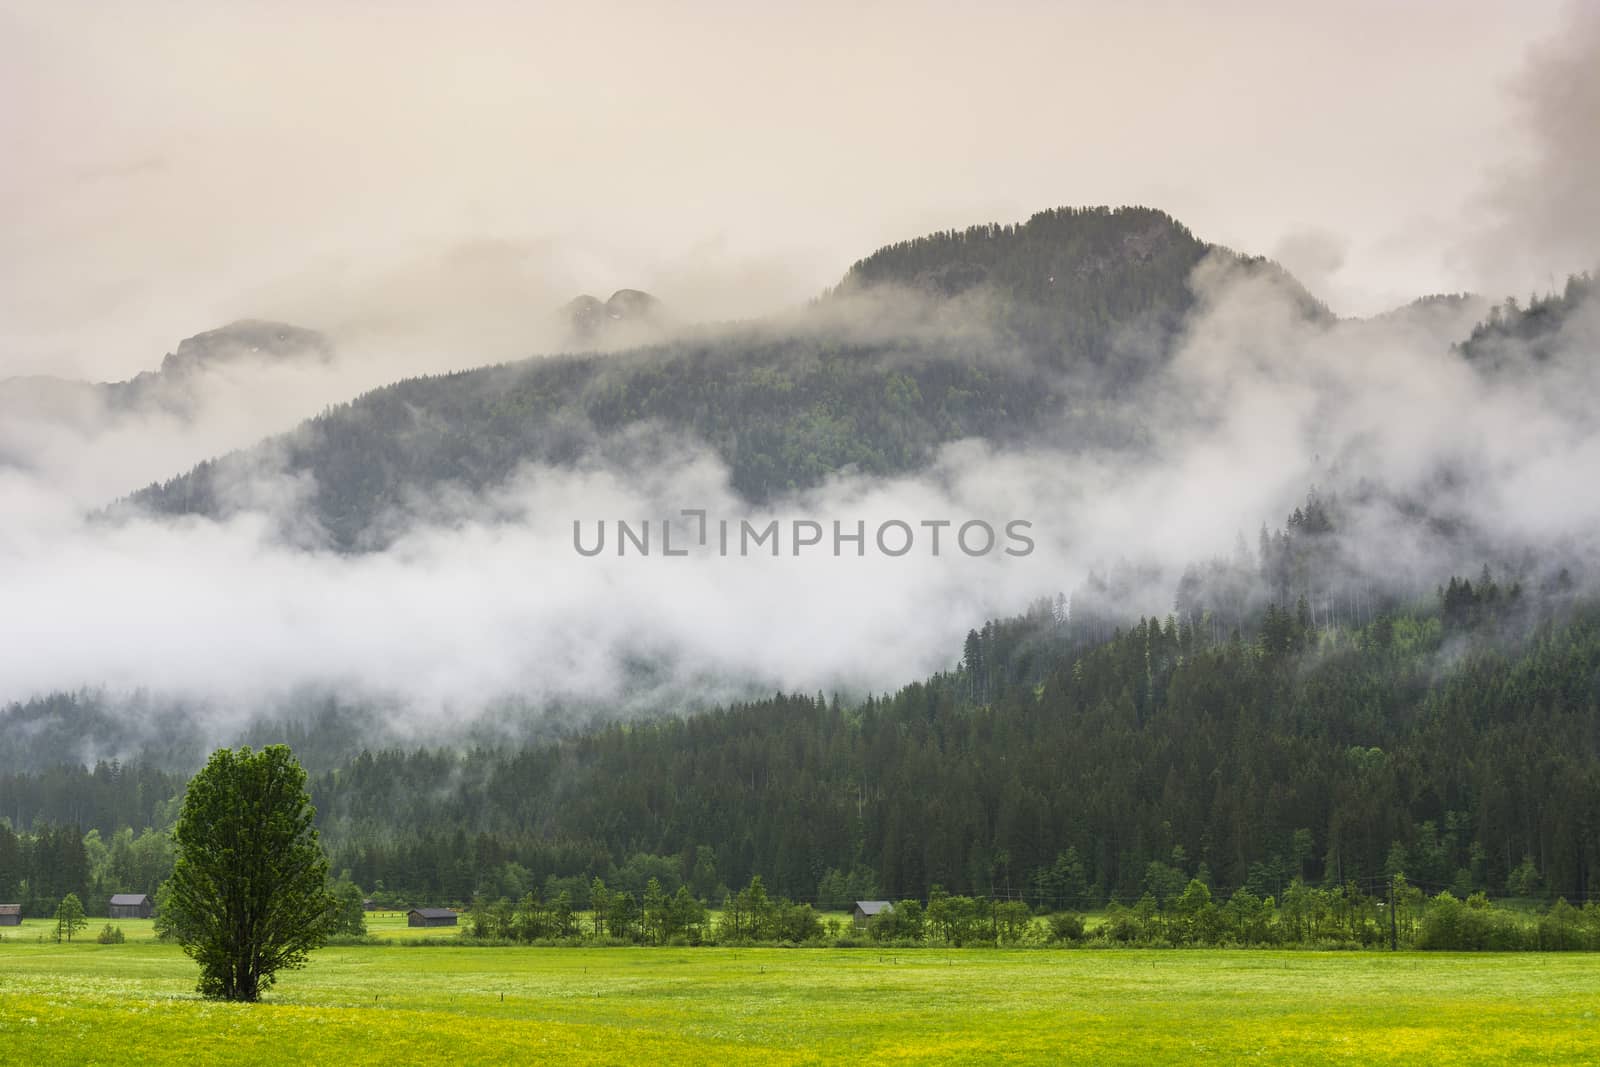 Rain and clouds in Austria by gkuna